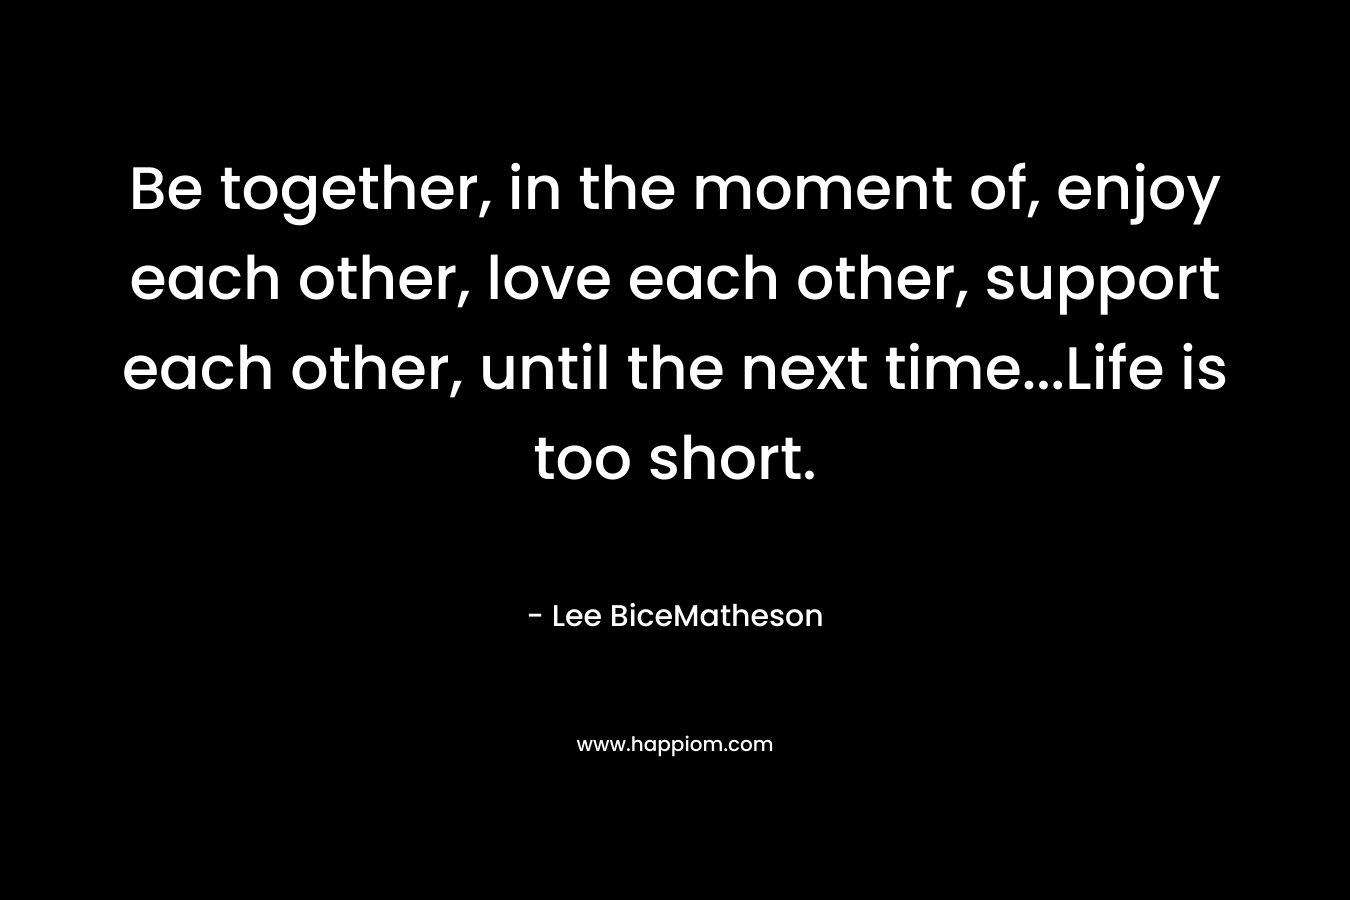 Be together, in the moment of, enjoy each other, love each other, support each other, until the next time…Life is too short. – Lee BiceMatheson